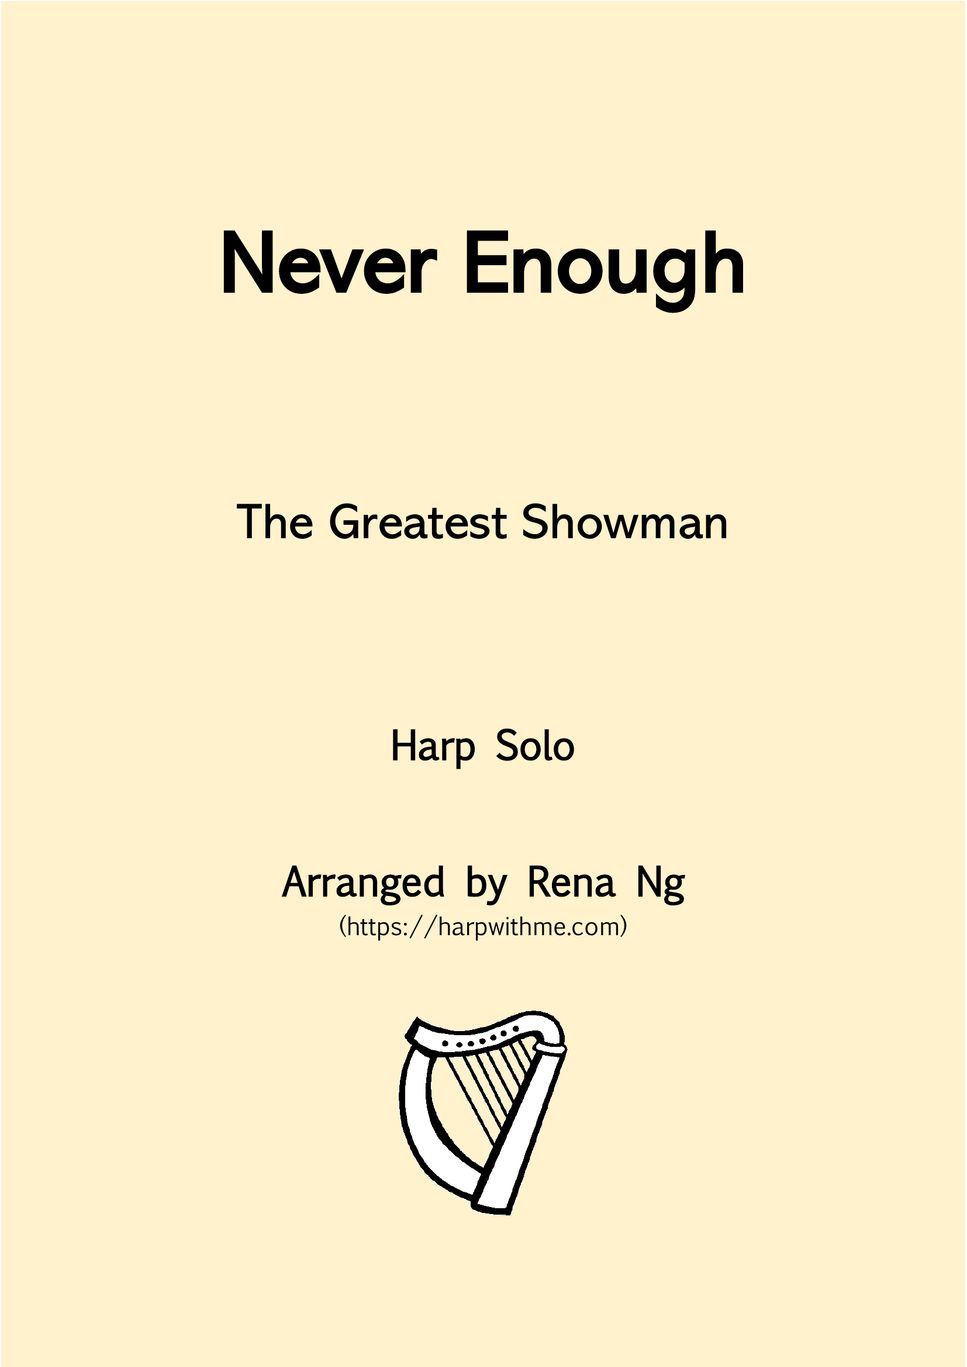 The Greatest Showman - Never Enough (Harp Solo) by Harp With Me